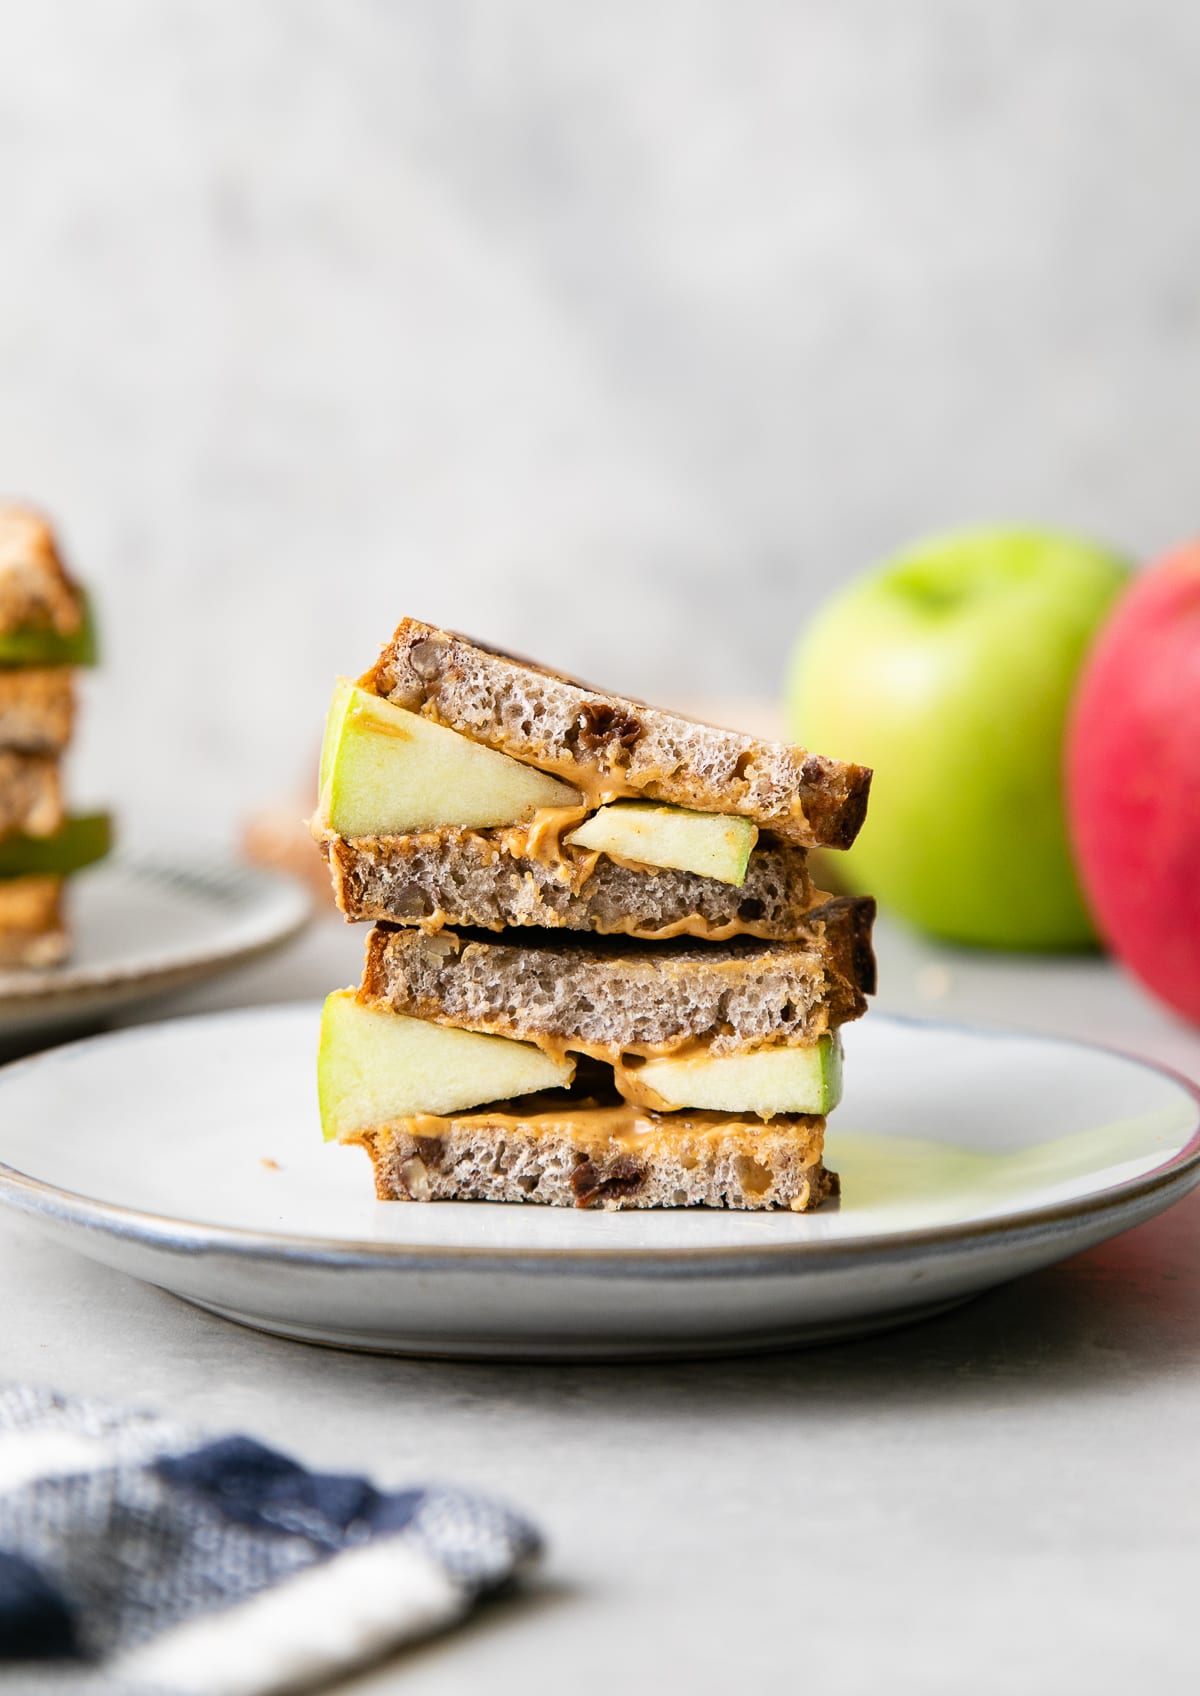 head on view of grilled peanut butter apple sandwich on a plate with items surrounding.